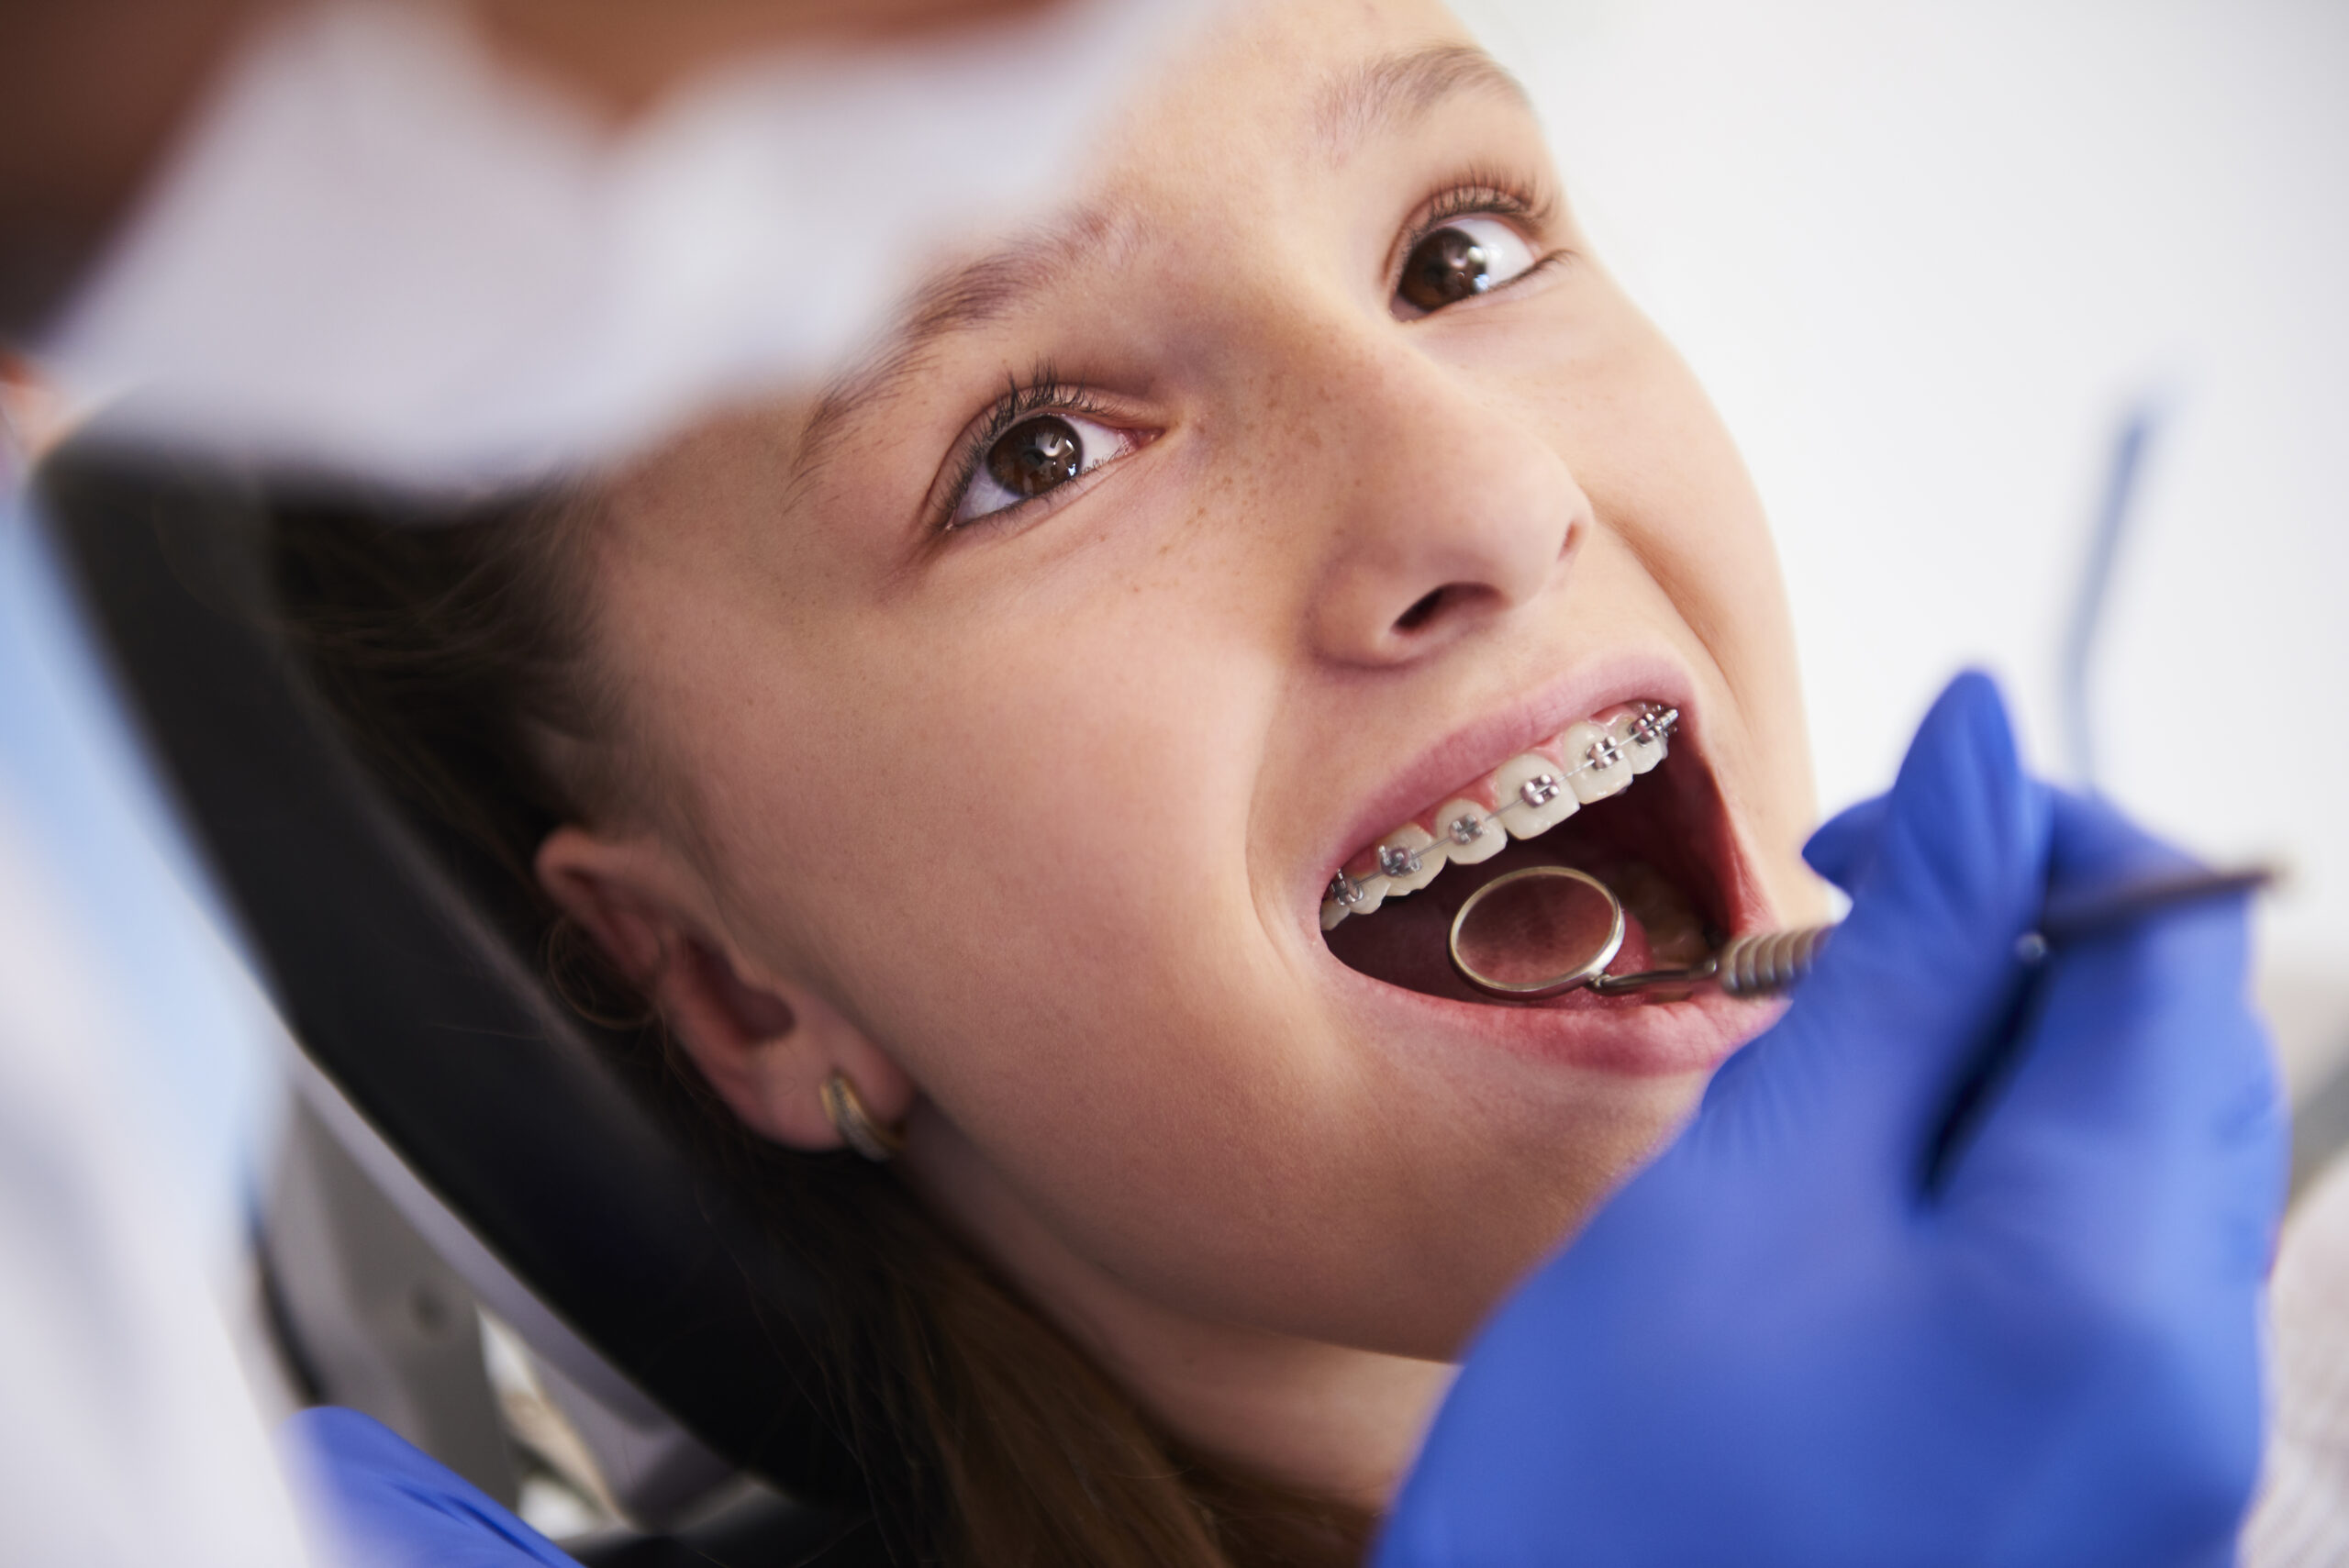 Orthodontic Care for Children: When is the Right Time to Start? 2